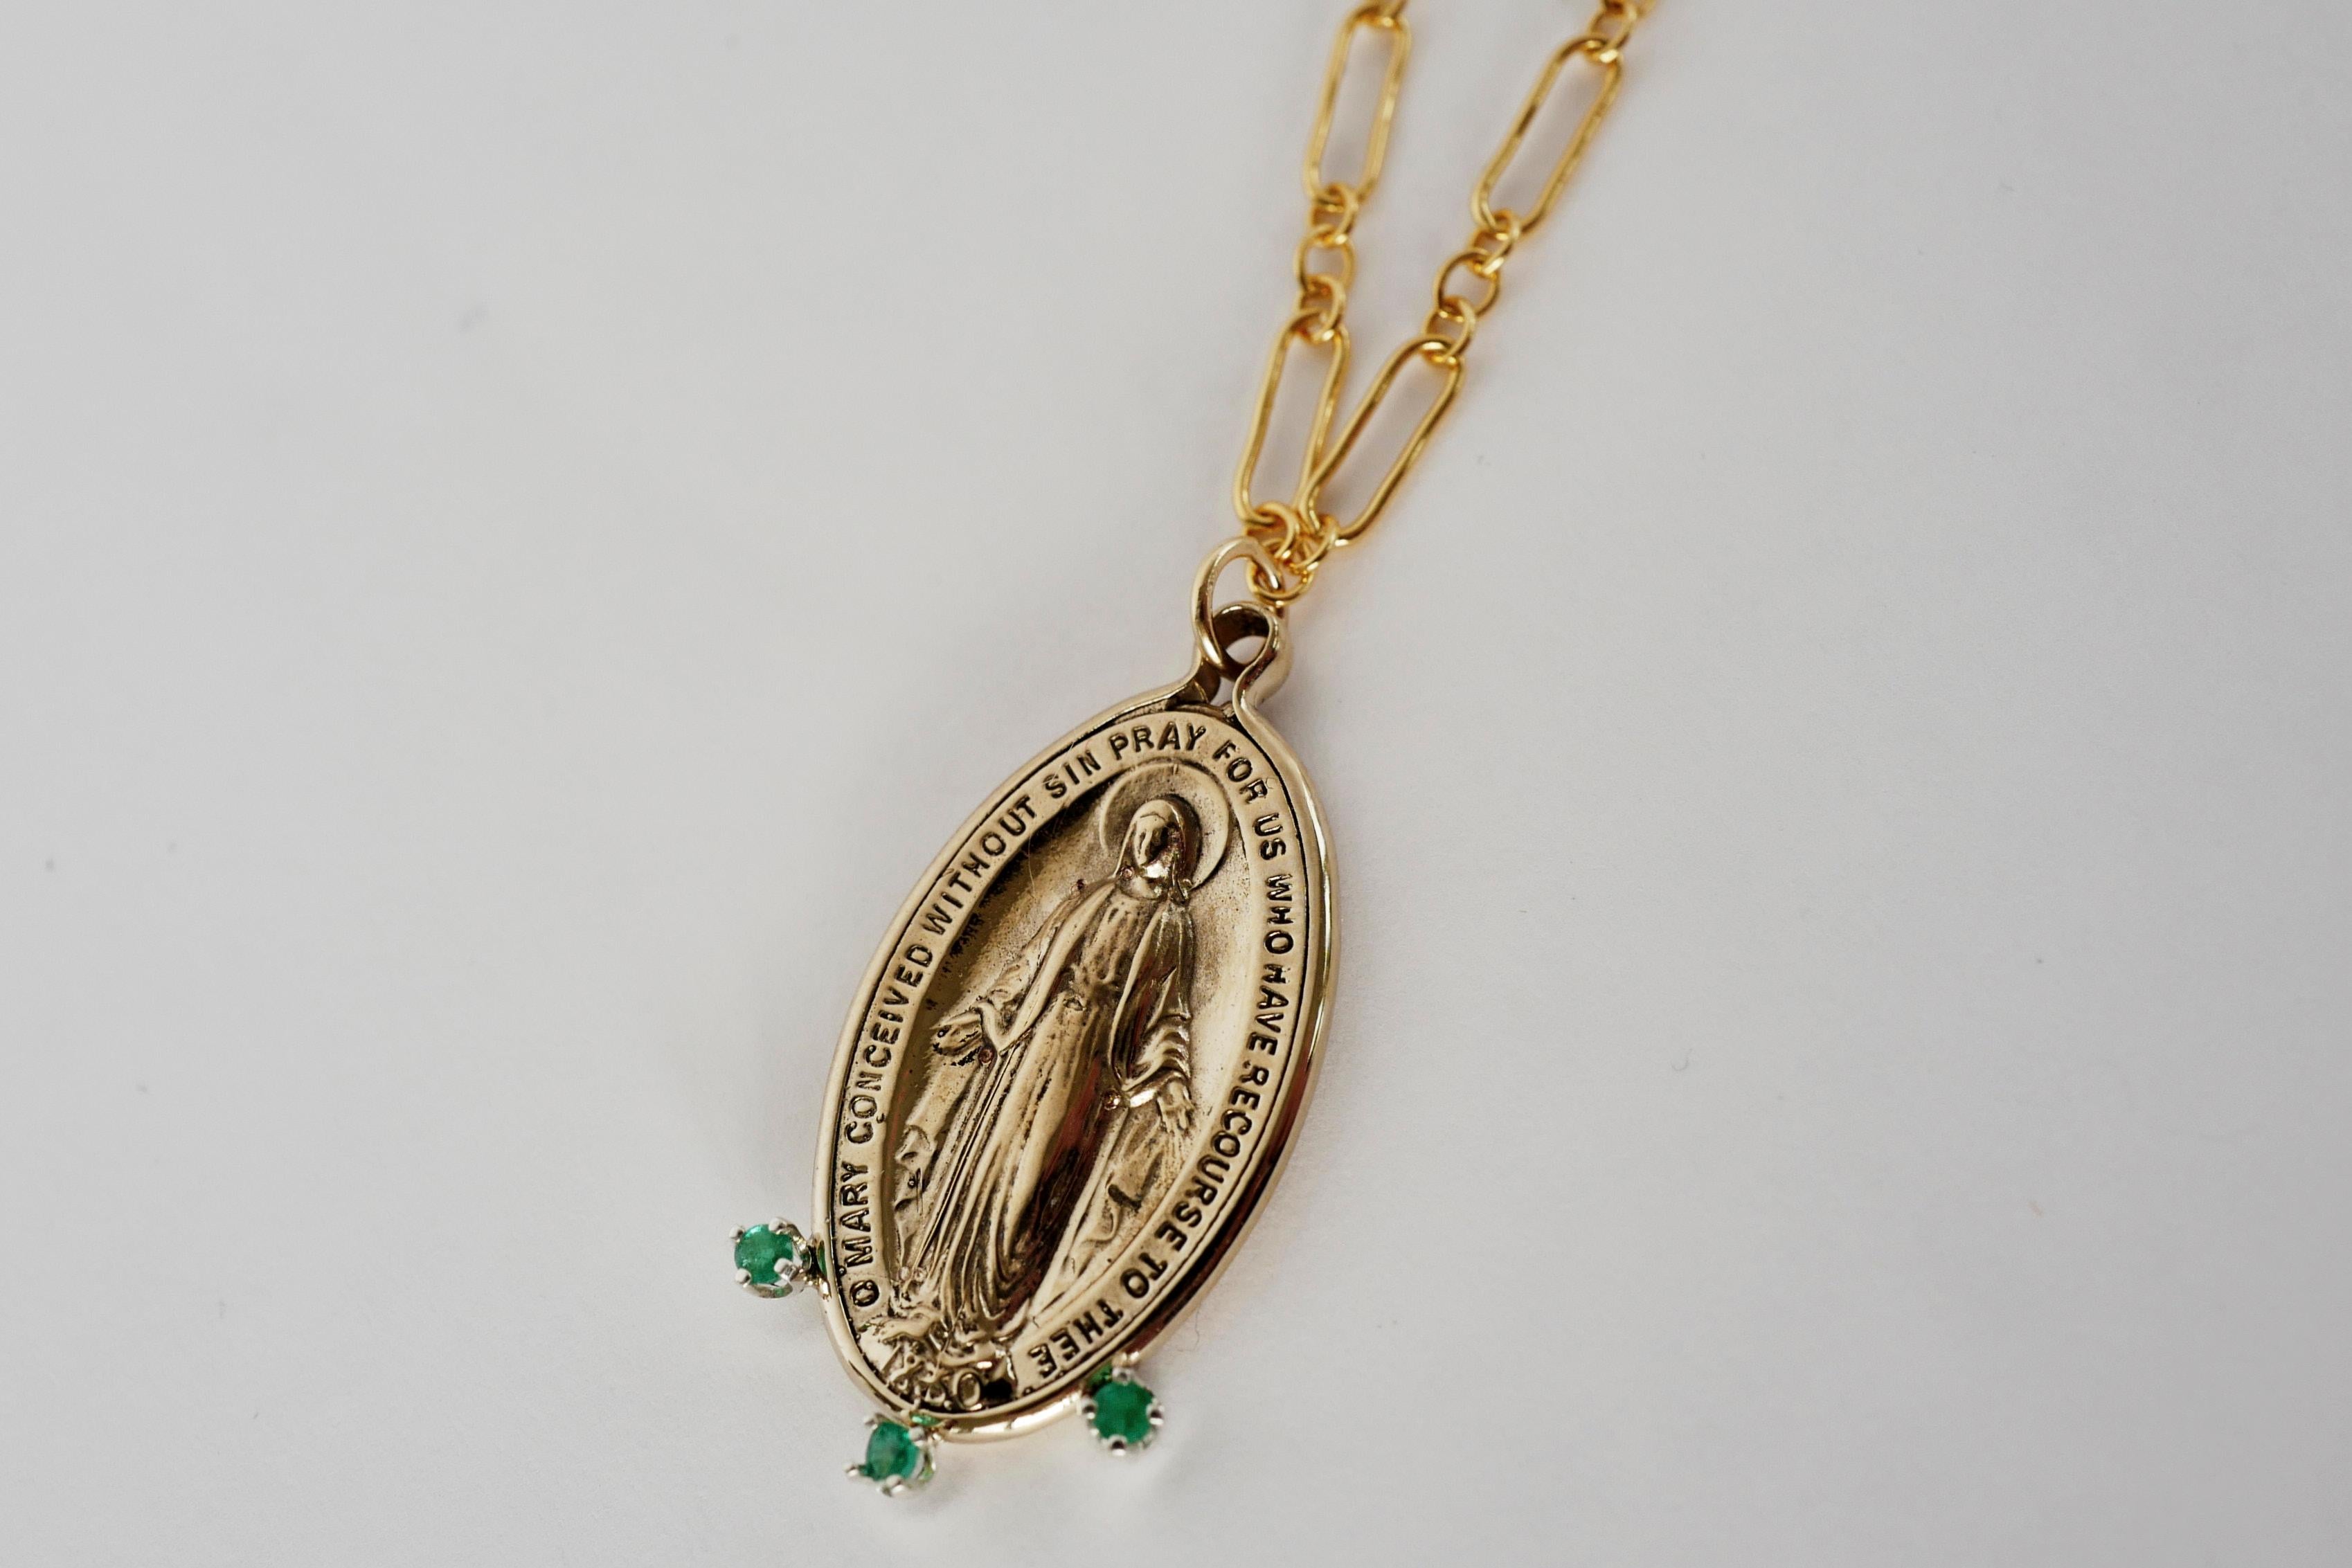 Emerald Virgin Mary Oval Medal Chain Necklace Gold Filled Chain J Dauphin For Sale 2